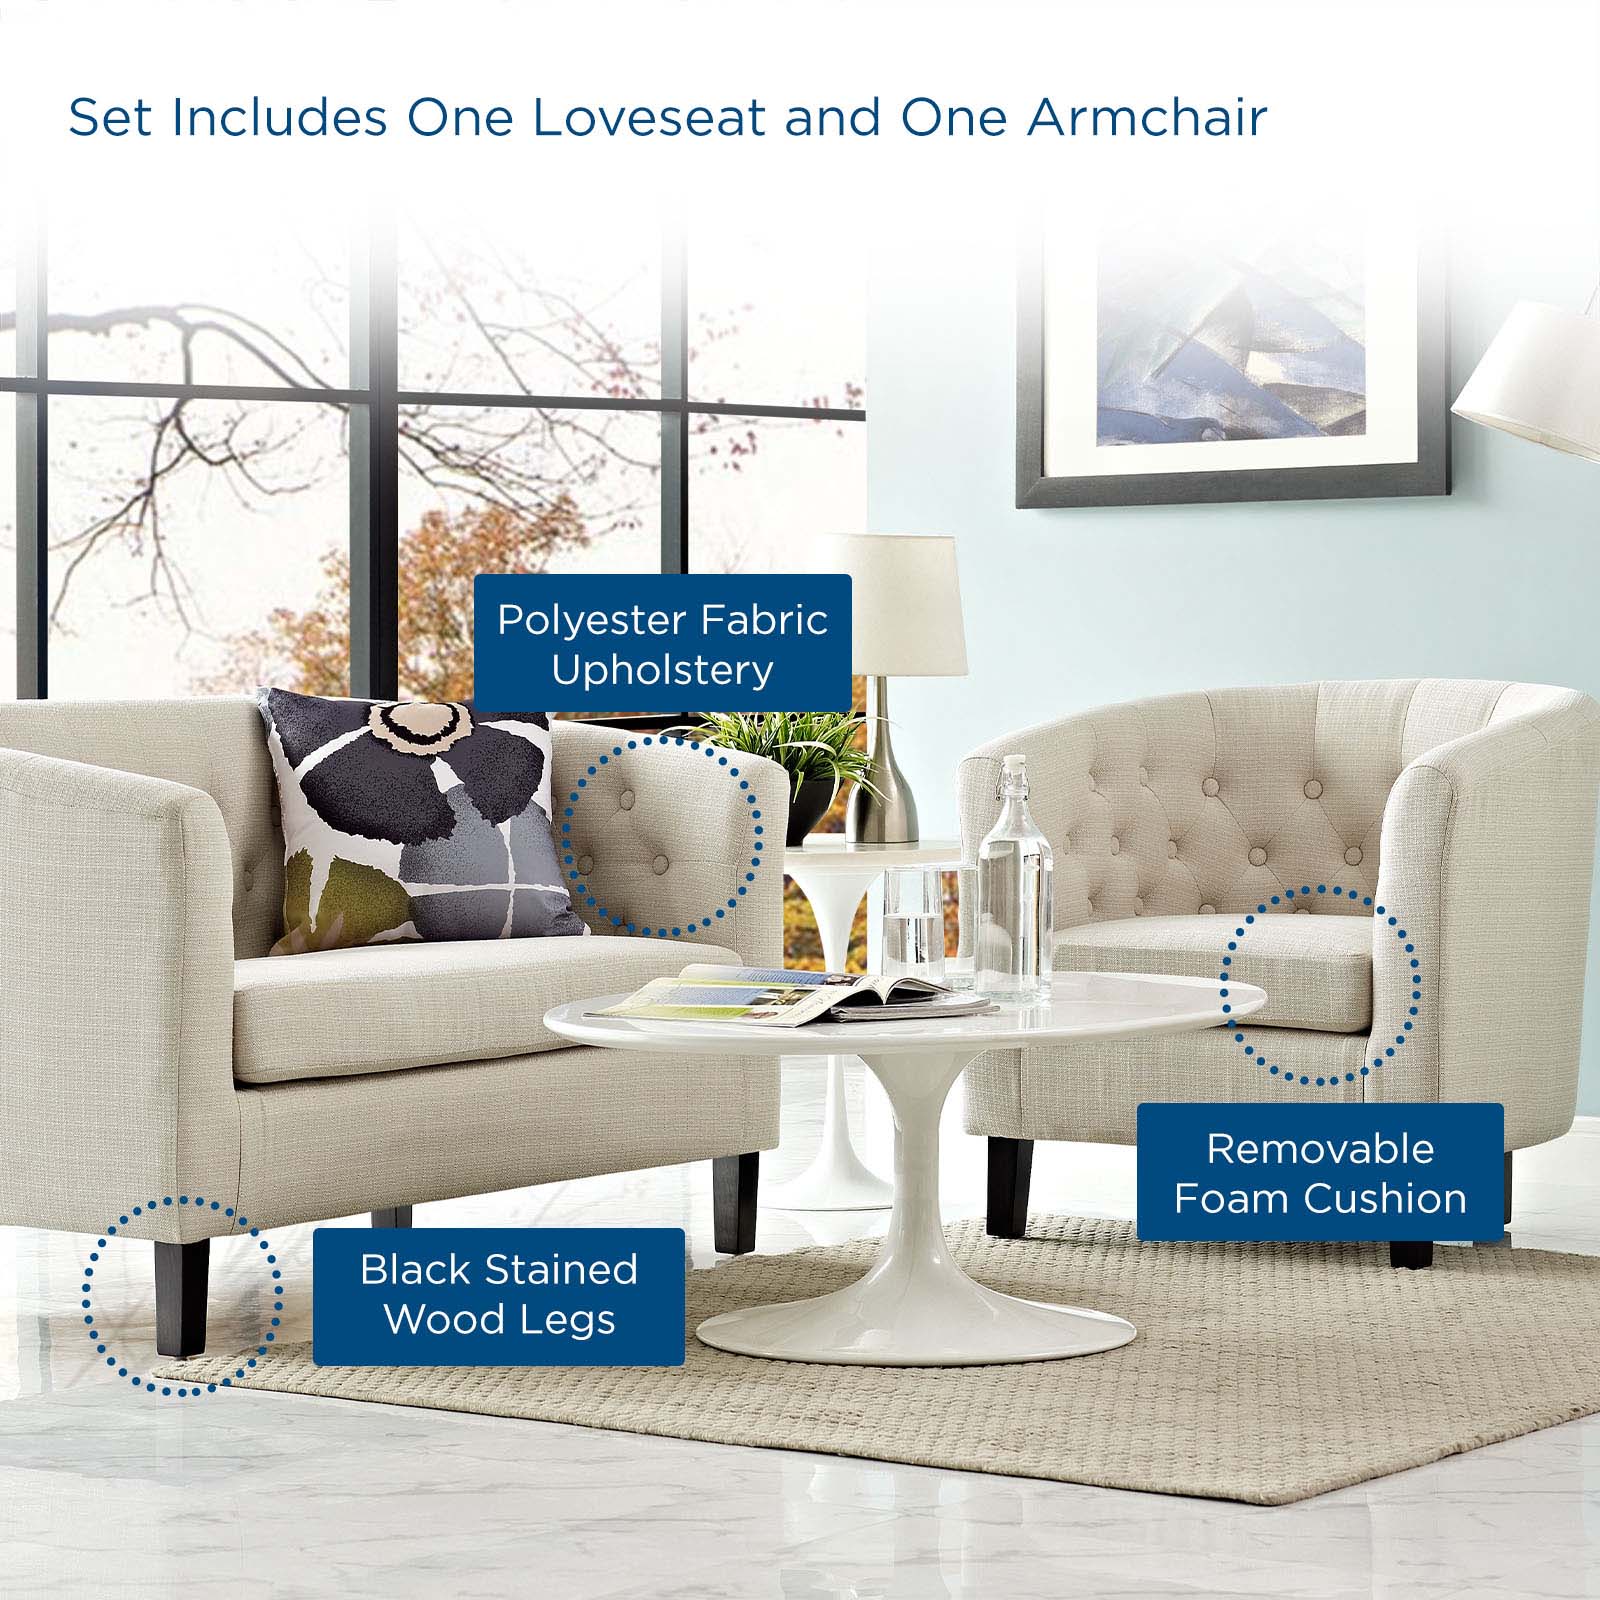 Modway Living Room Sets - Prospect 2 Piece Upholstered Fabric Loveseat and Armchair Set Beige